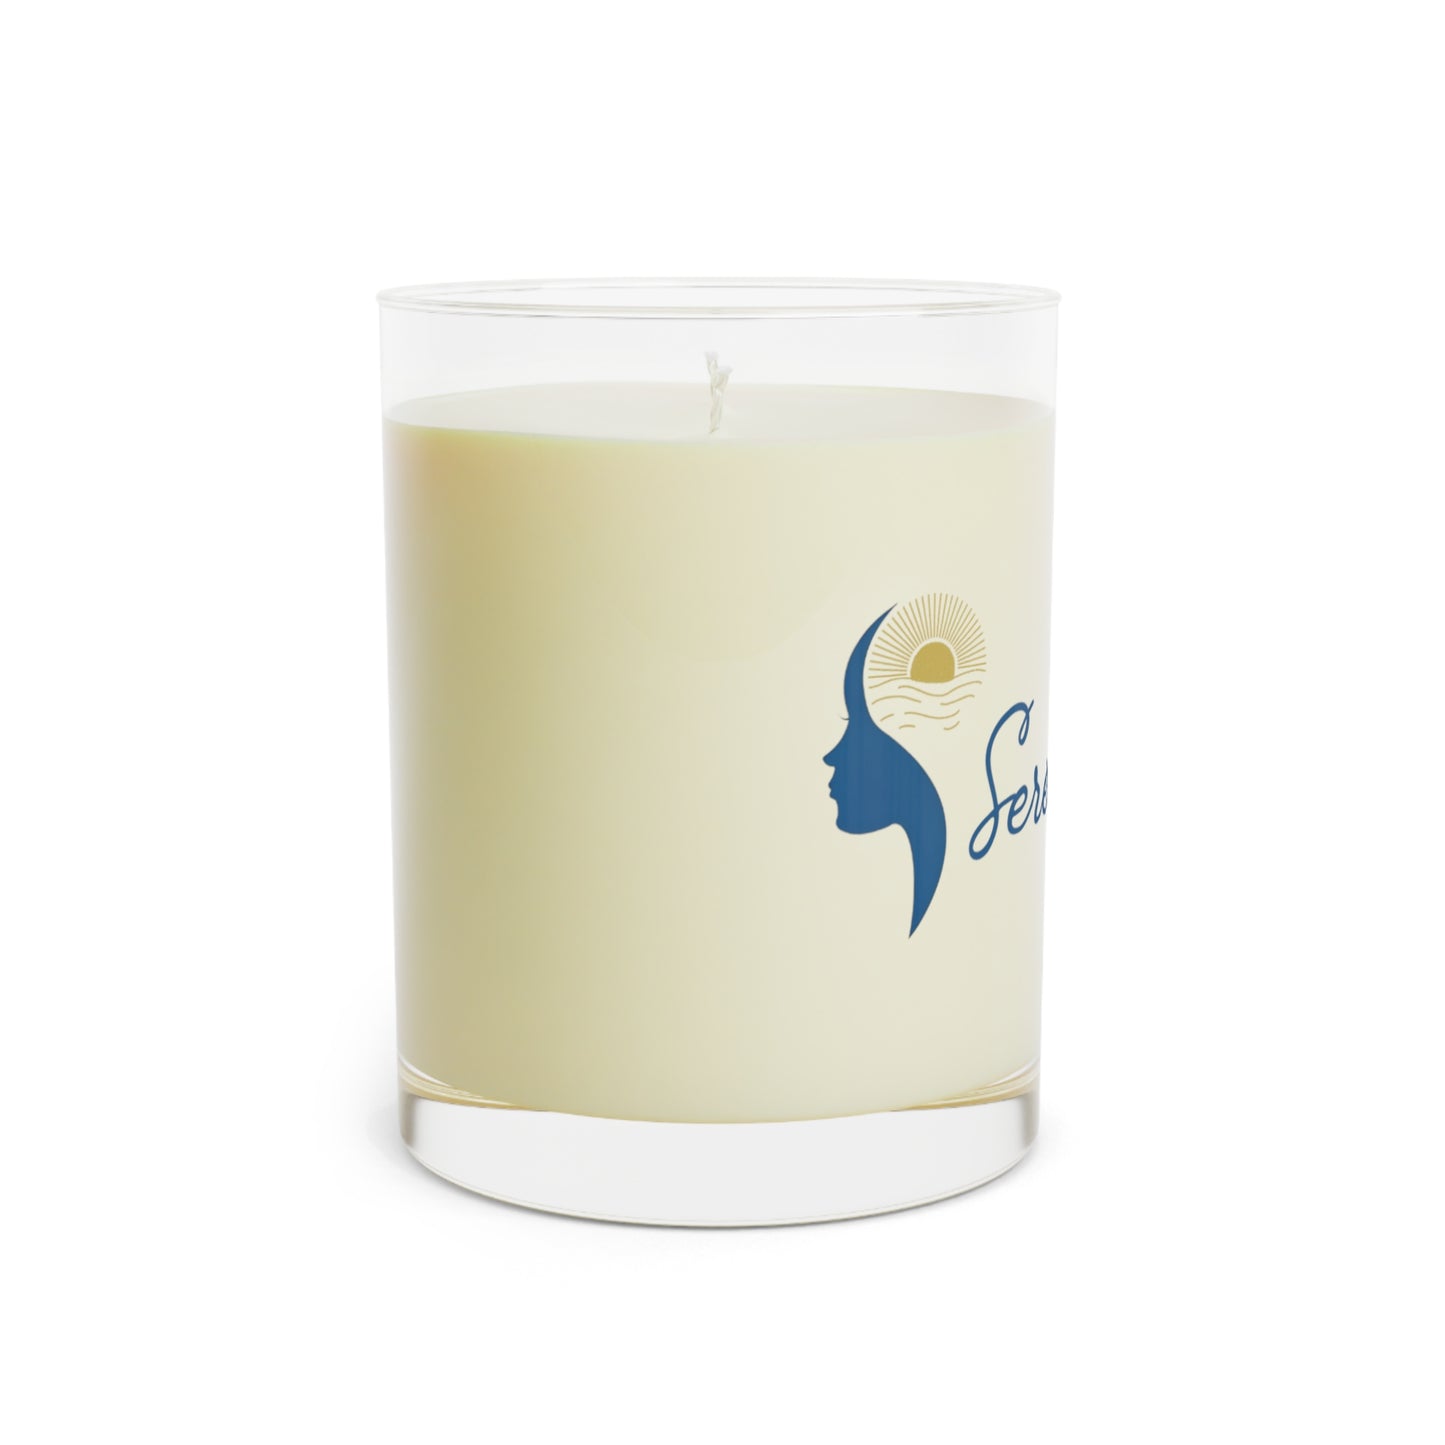 Seventh Avenue Apothecary Minted Lavender + Sage Candle 11 oz